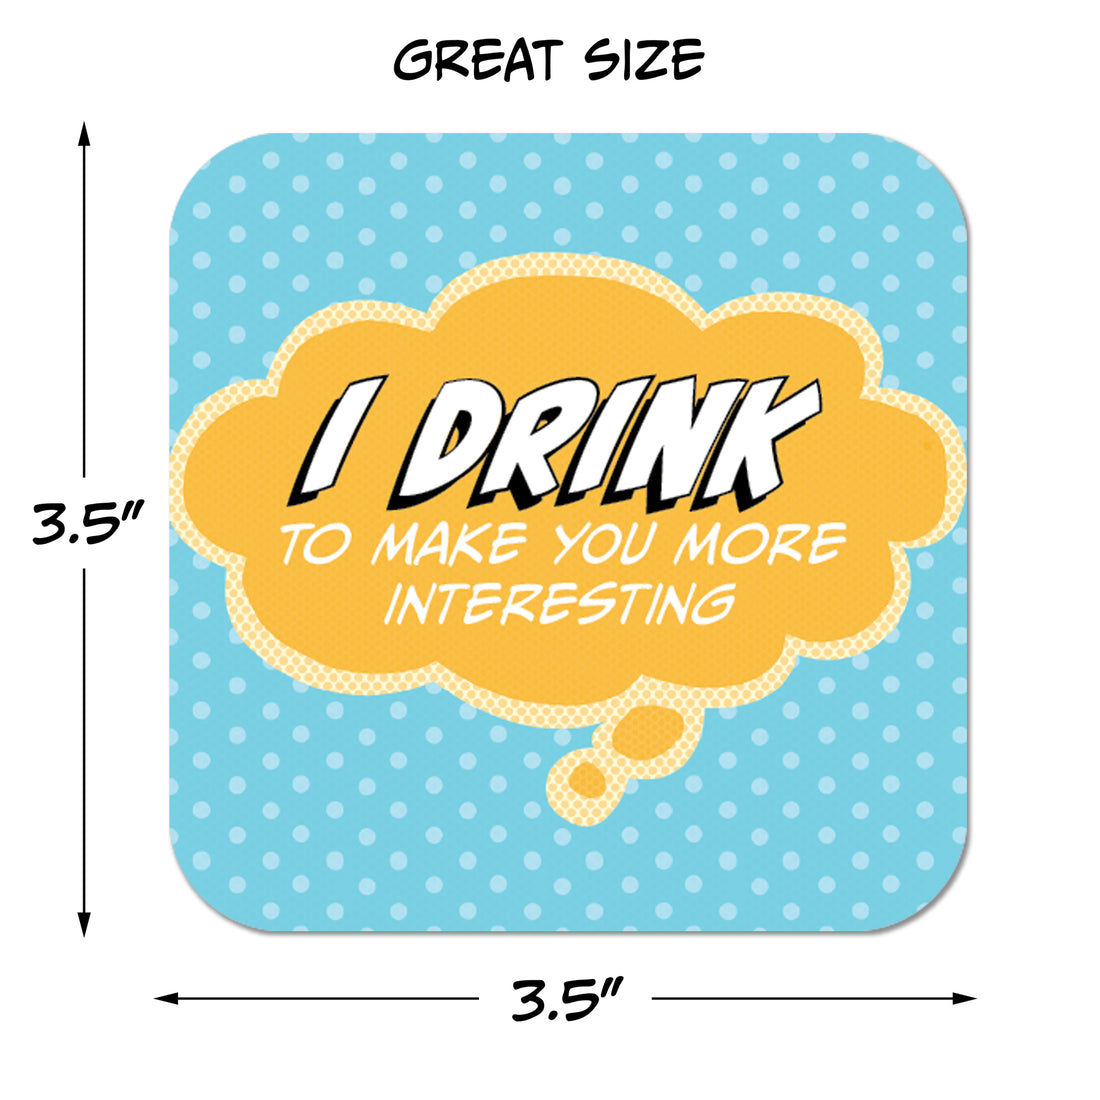 Coaster: Pop Life, I Drink to Make You More Interesting - Pack of 6